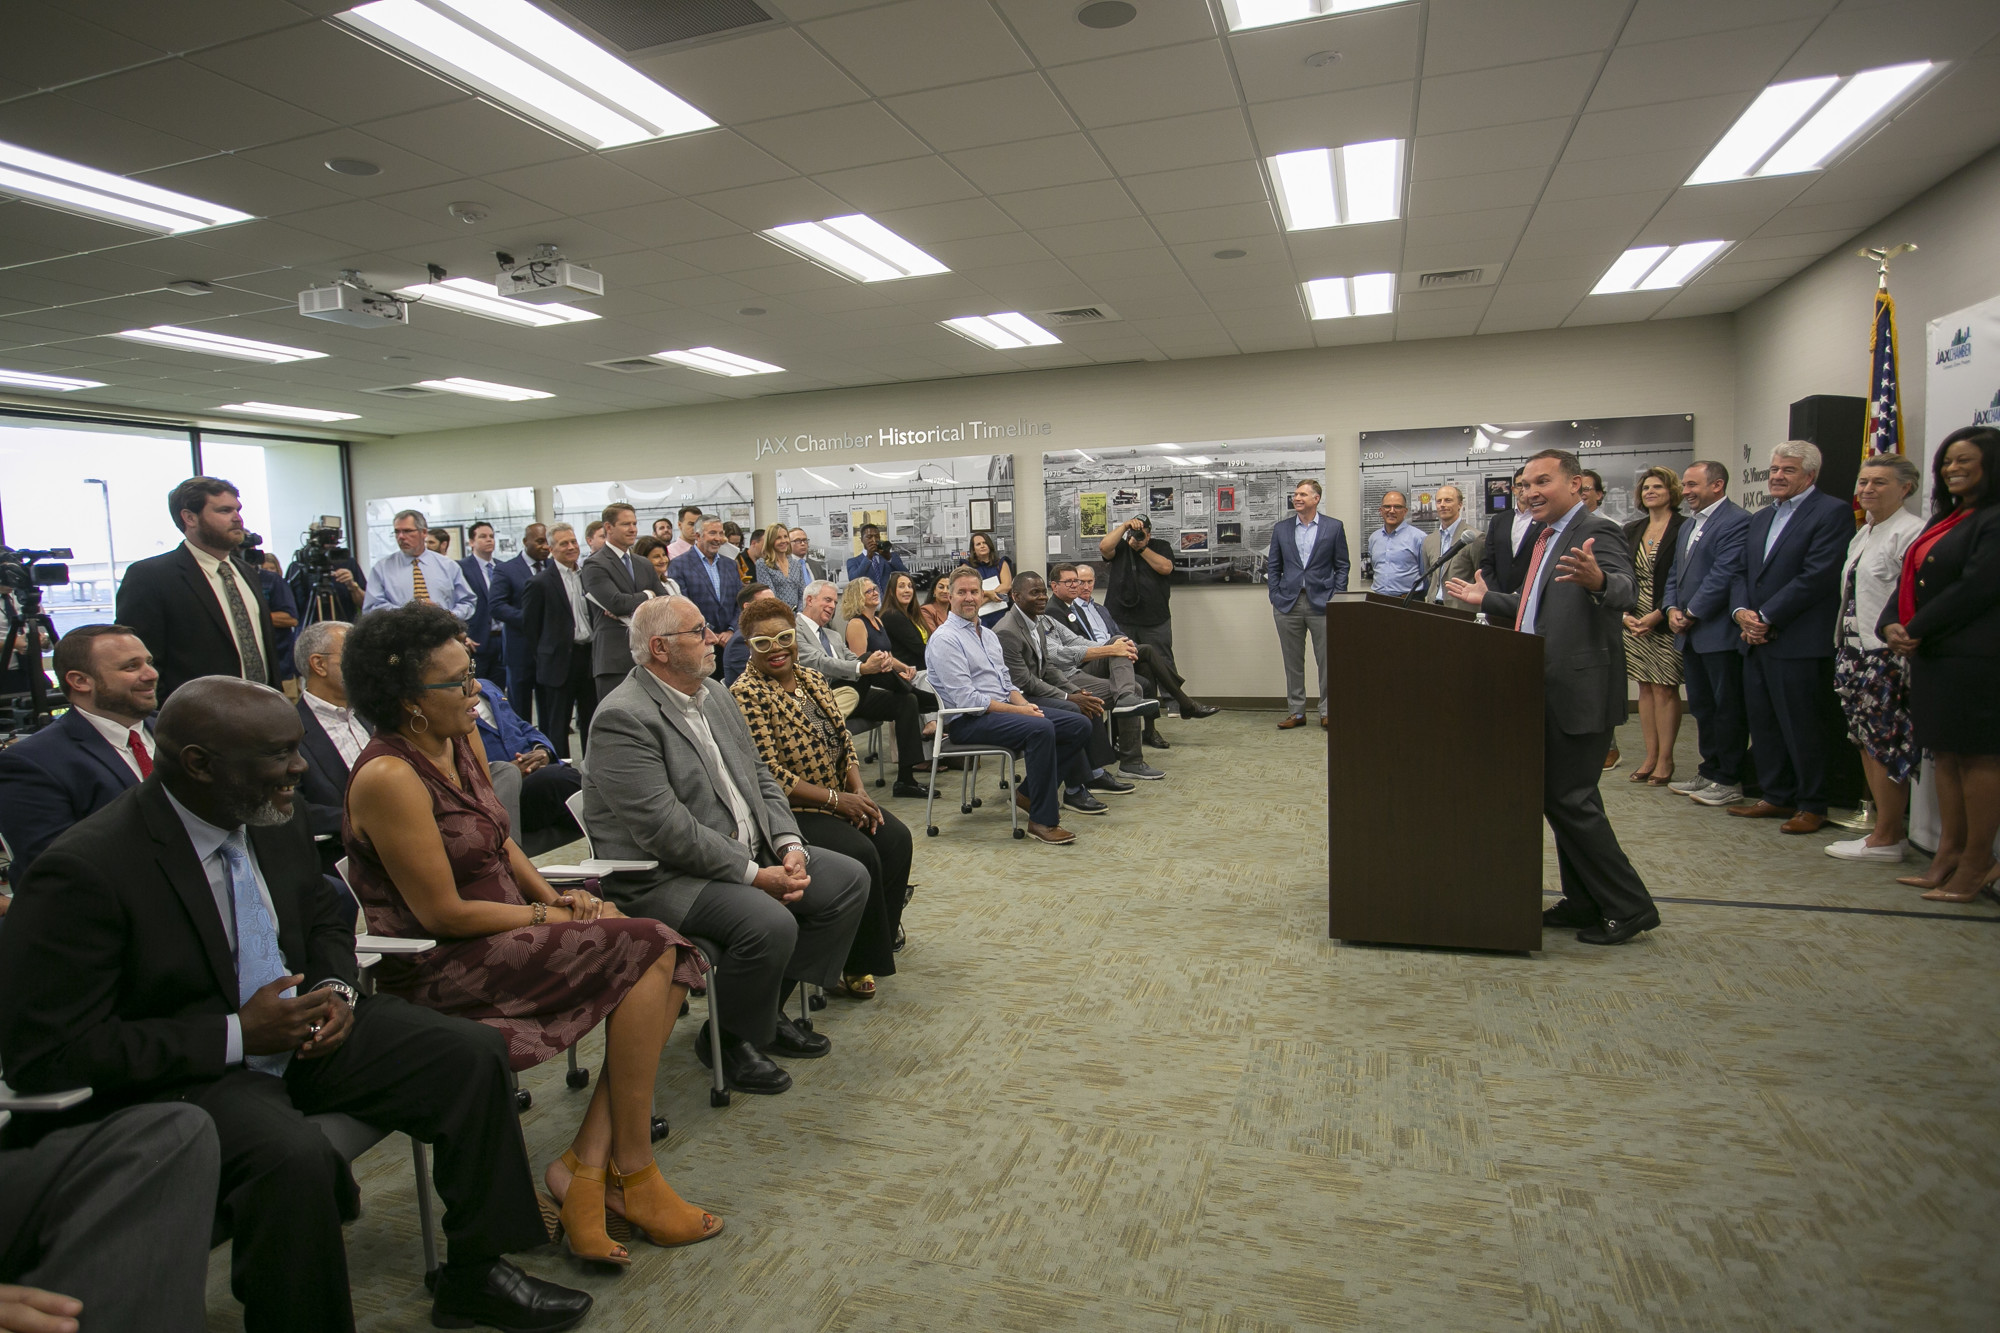 Jacksonville Mayor Lenny Curry takes part in the Dun & Bradstreet announcement of its move to Jacksonville on May 20 at the JAX Chamber headquarters. (City of Jacksonville photo)